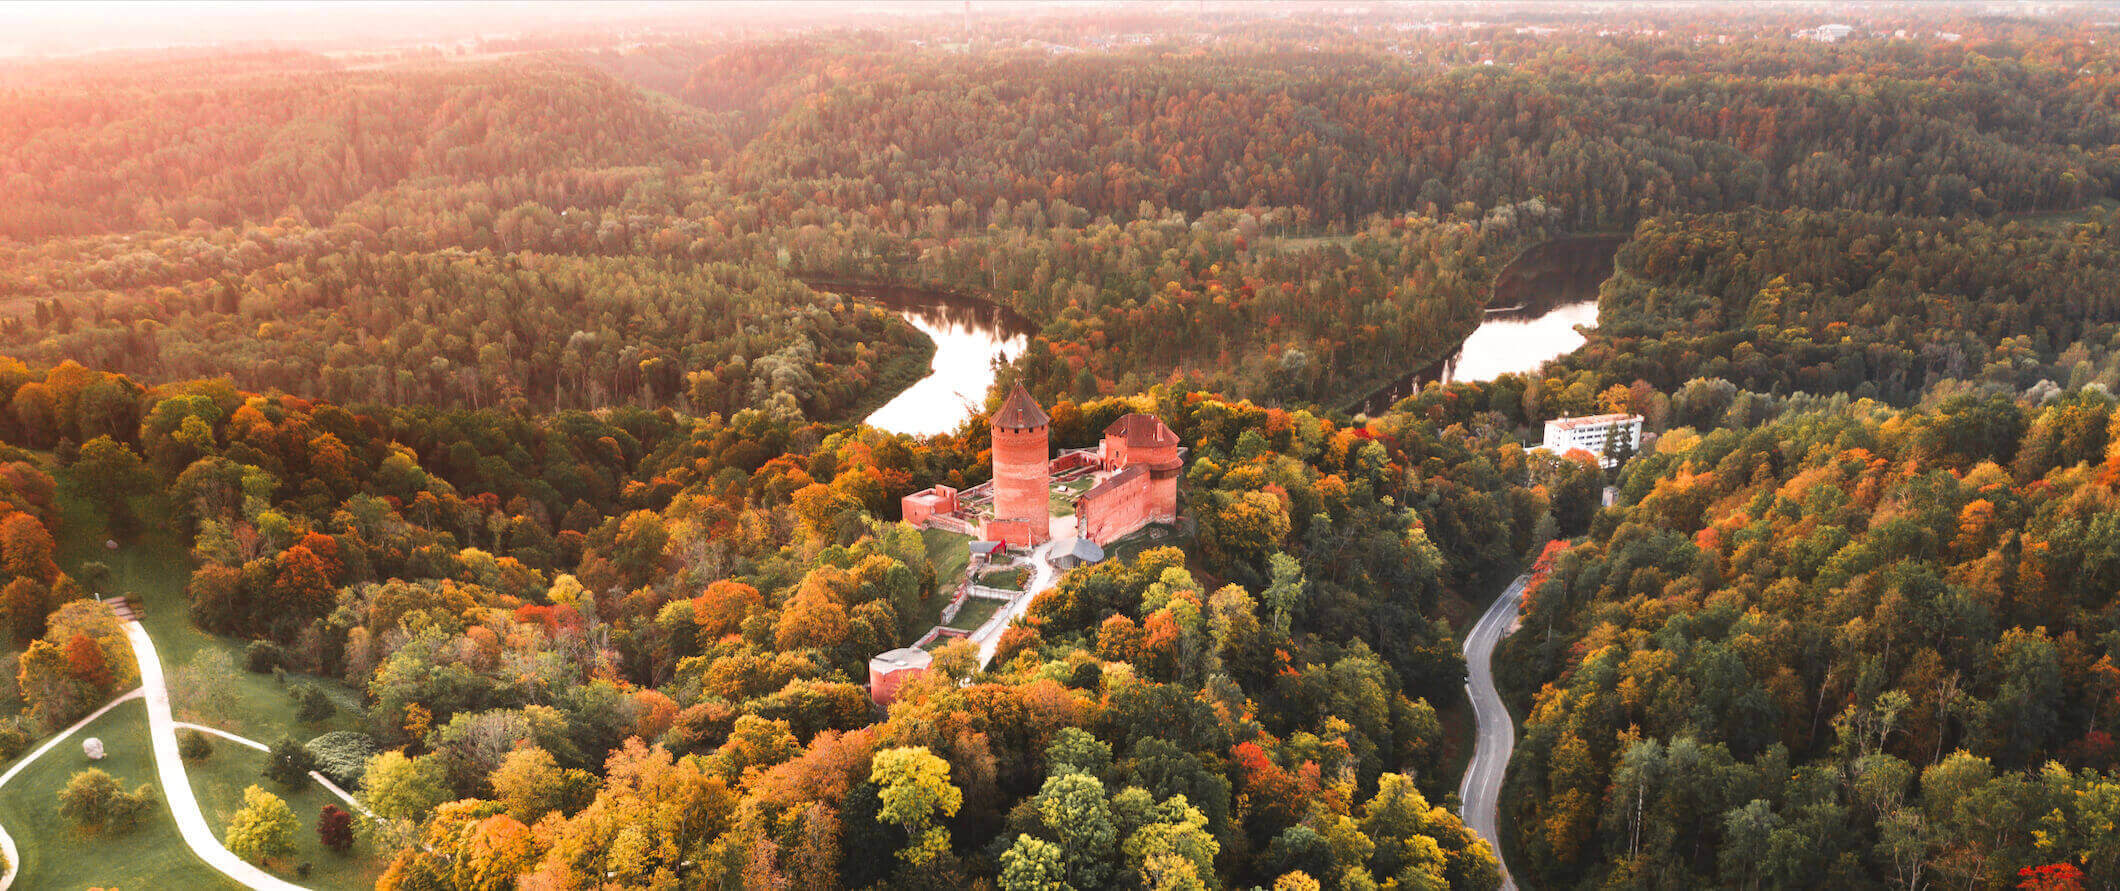 A towering castle in the middle of a forest in Latvia